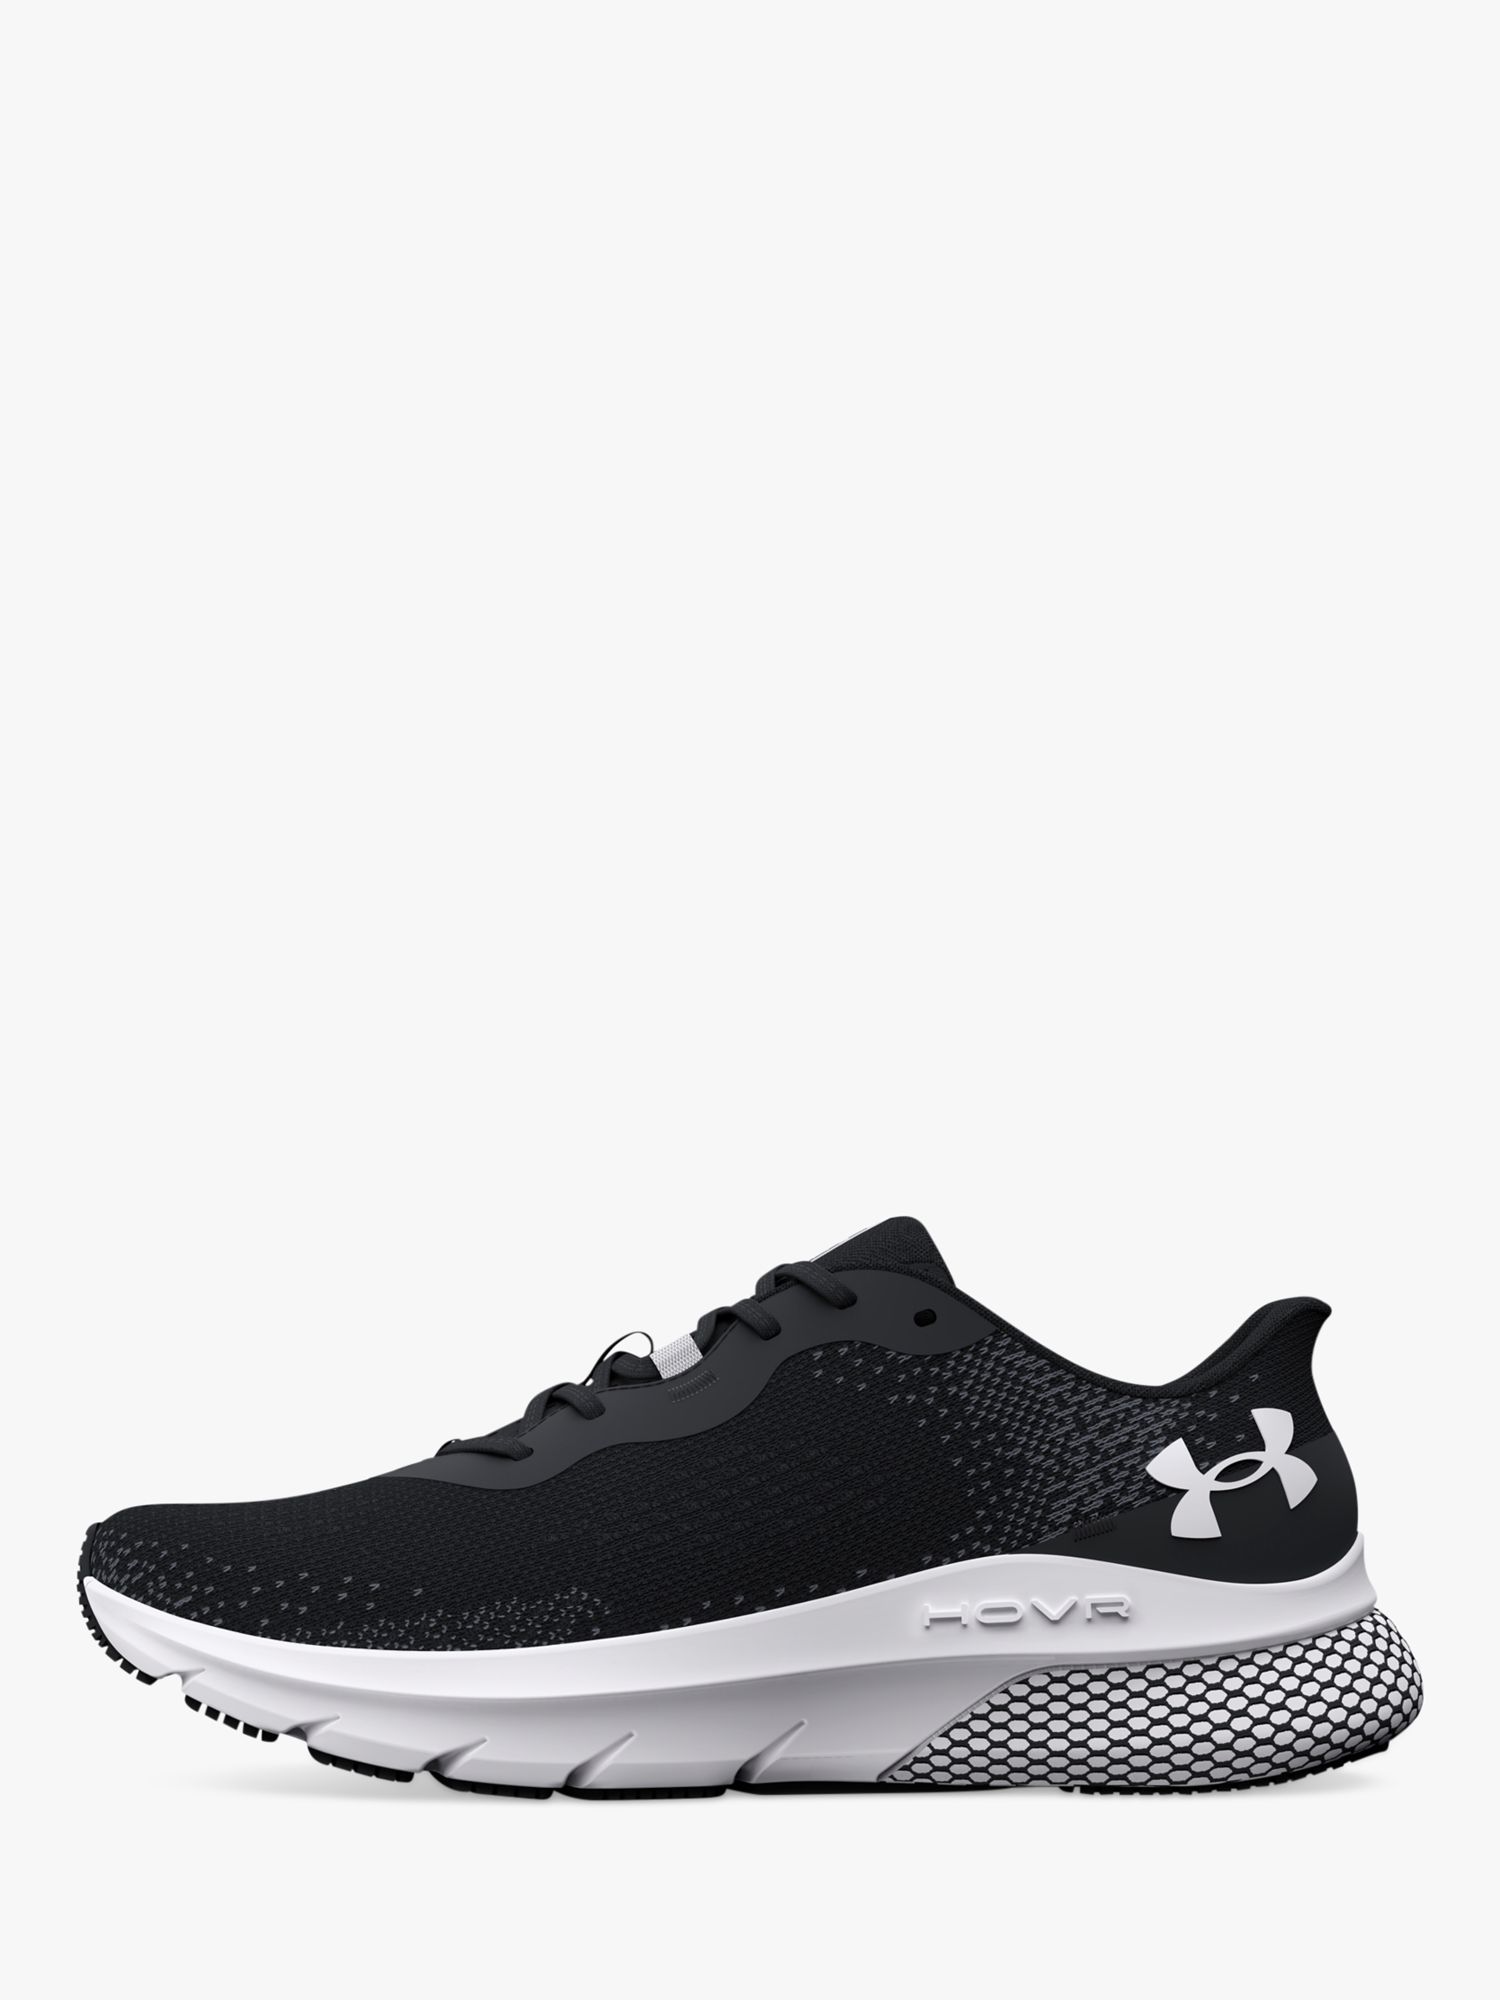 Under Armour HOVR Men's Sports Trainers, Black/White, 9